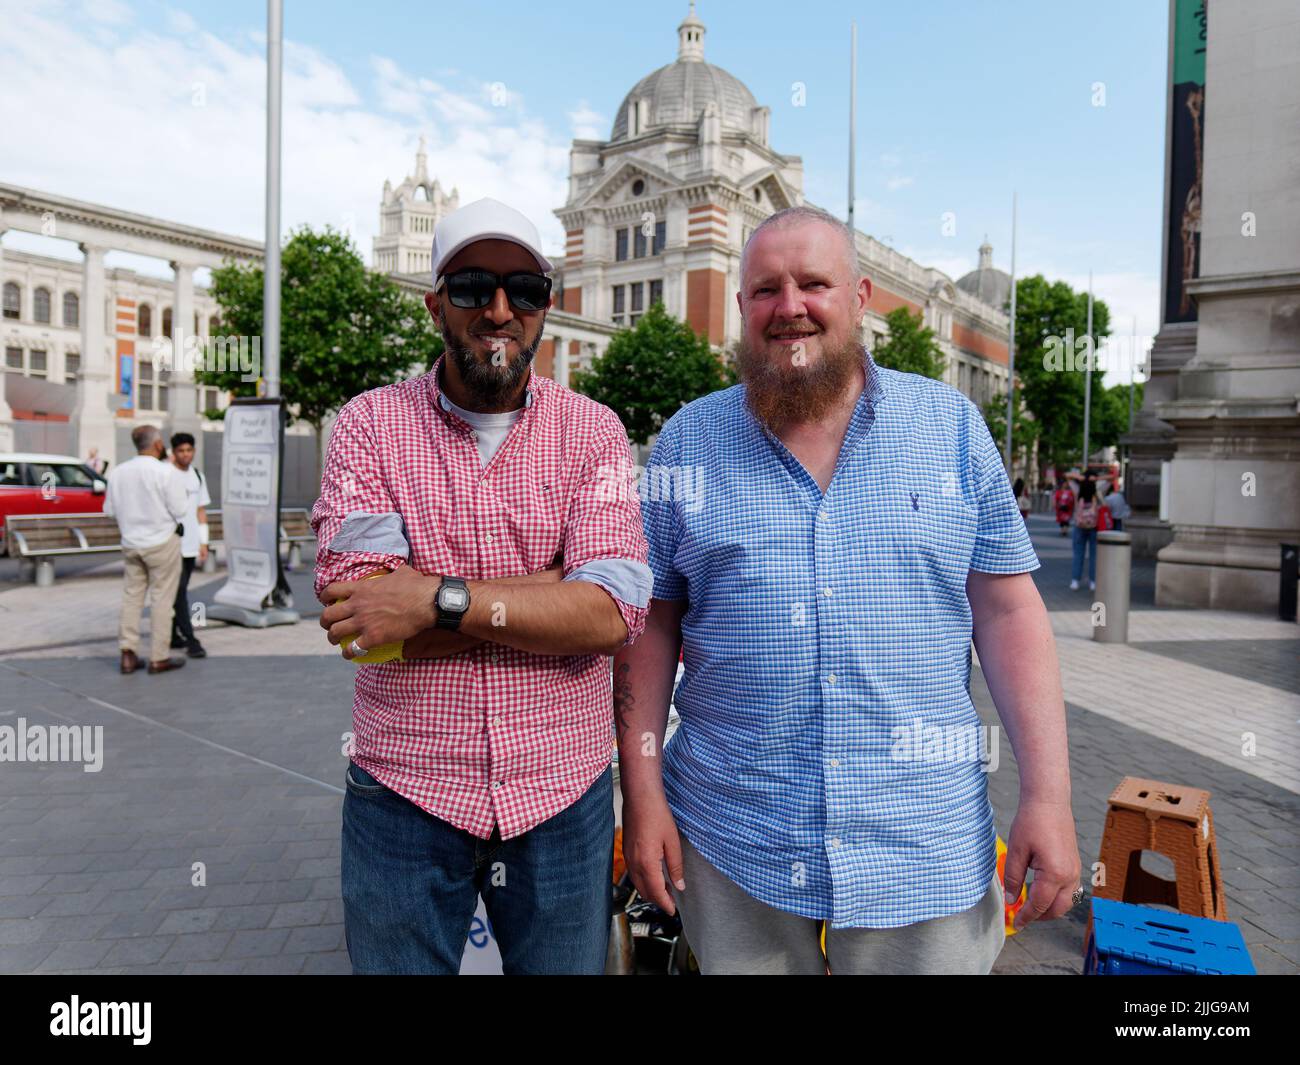 London, Greater London, England, June 15 2022: Two bearded men one with sun glasses and a cap smile and pose for a photo on Exhibition Road. Stock Photo